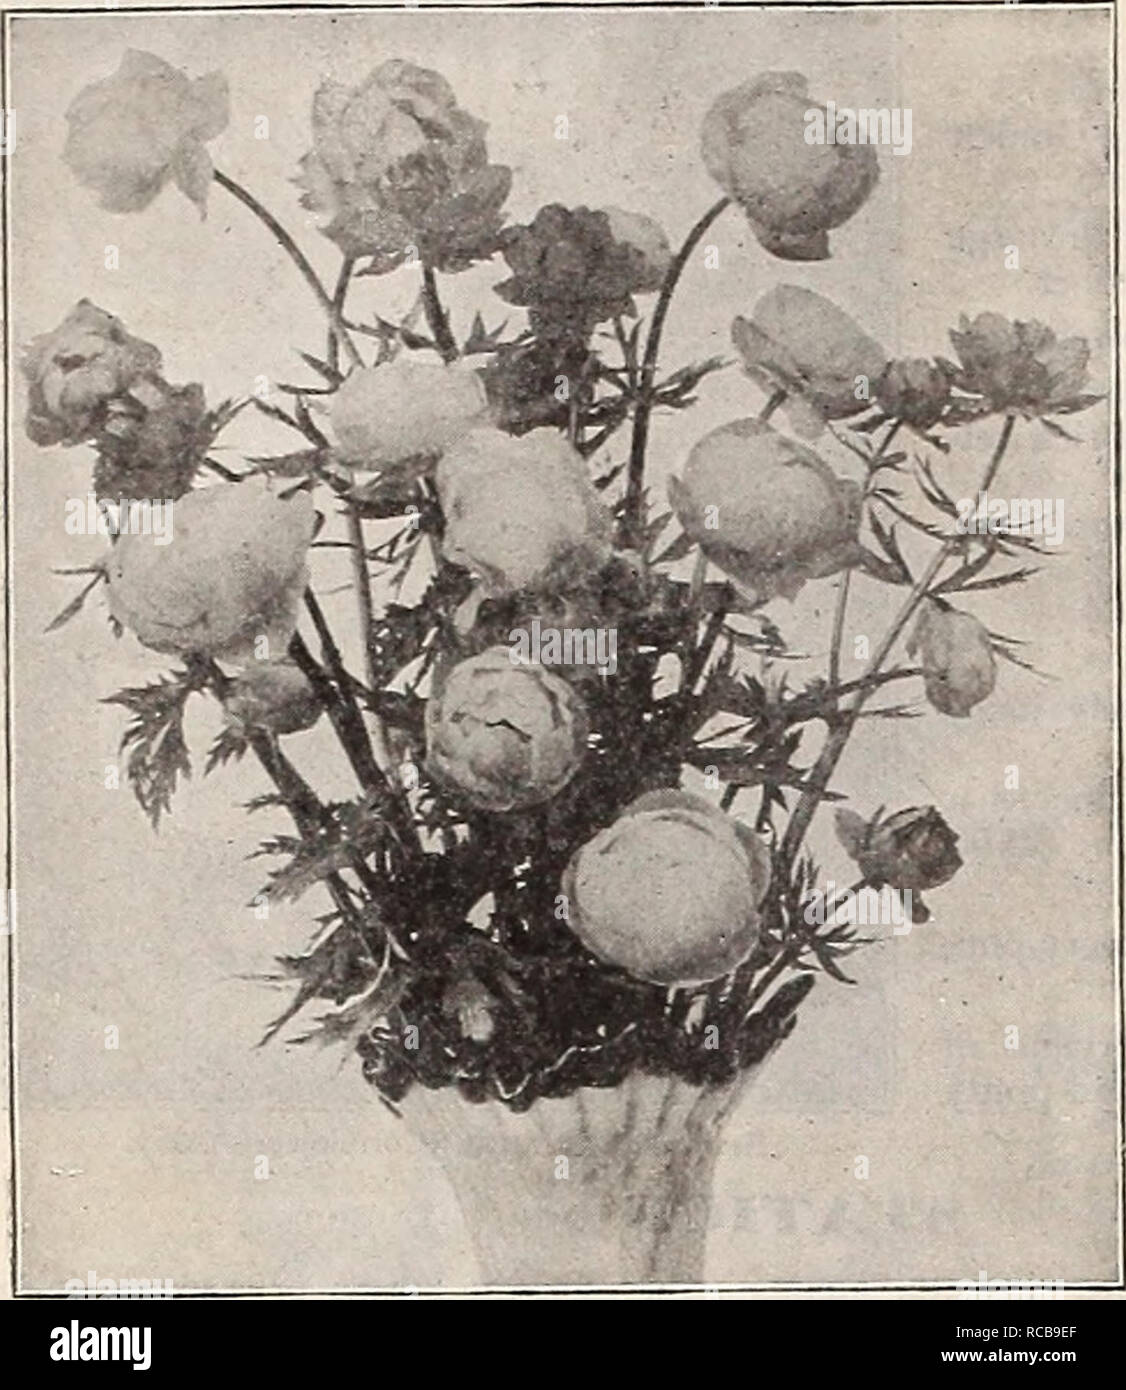 . Dreer's autumn catalogue of bulbs plants seeds etc. for autumn planting 1909. Bulbs (Plants) Catalogs; Flowers Seeds Catalogs; Gardening Equipment and supplies Catalogs; Nurseries (Horticulture) Catalogs; Fruit Seeds Catalogs; Vegetables Seeds Catalogs. 58 nr [HENRrADREER-PHIIAKLPHIA^^ HARDY PERENNIAL PLANTS. Amethystina. feet. VERONICA (Speedwell) Amethyst-blue flowers in July and Augnst ; 2 Trollius (Globe Flower). TROLLIlTS (Globe Flower). Popular hardy perennials, flowering freely from May until August ; 2 to 2i ft, Europaeus. Large, bright yellow, globular flowers, 2 inches in diameter. Stock Photo